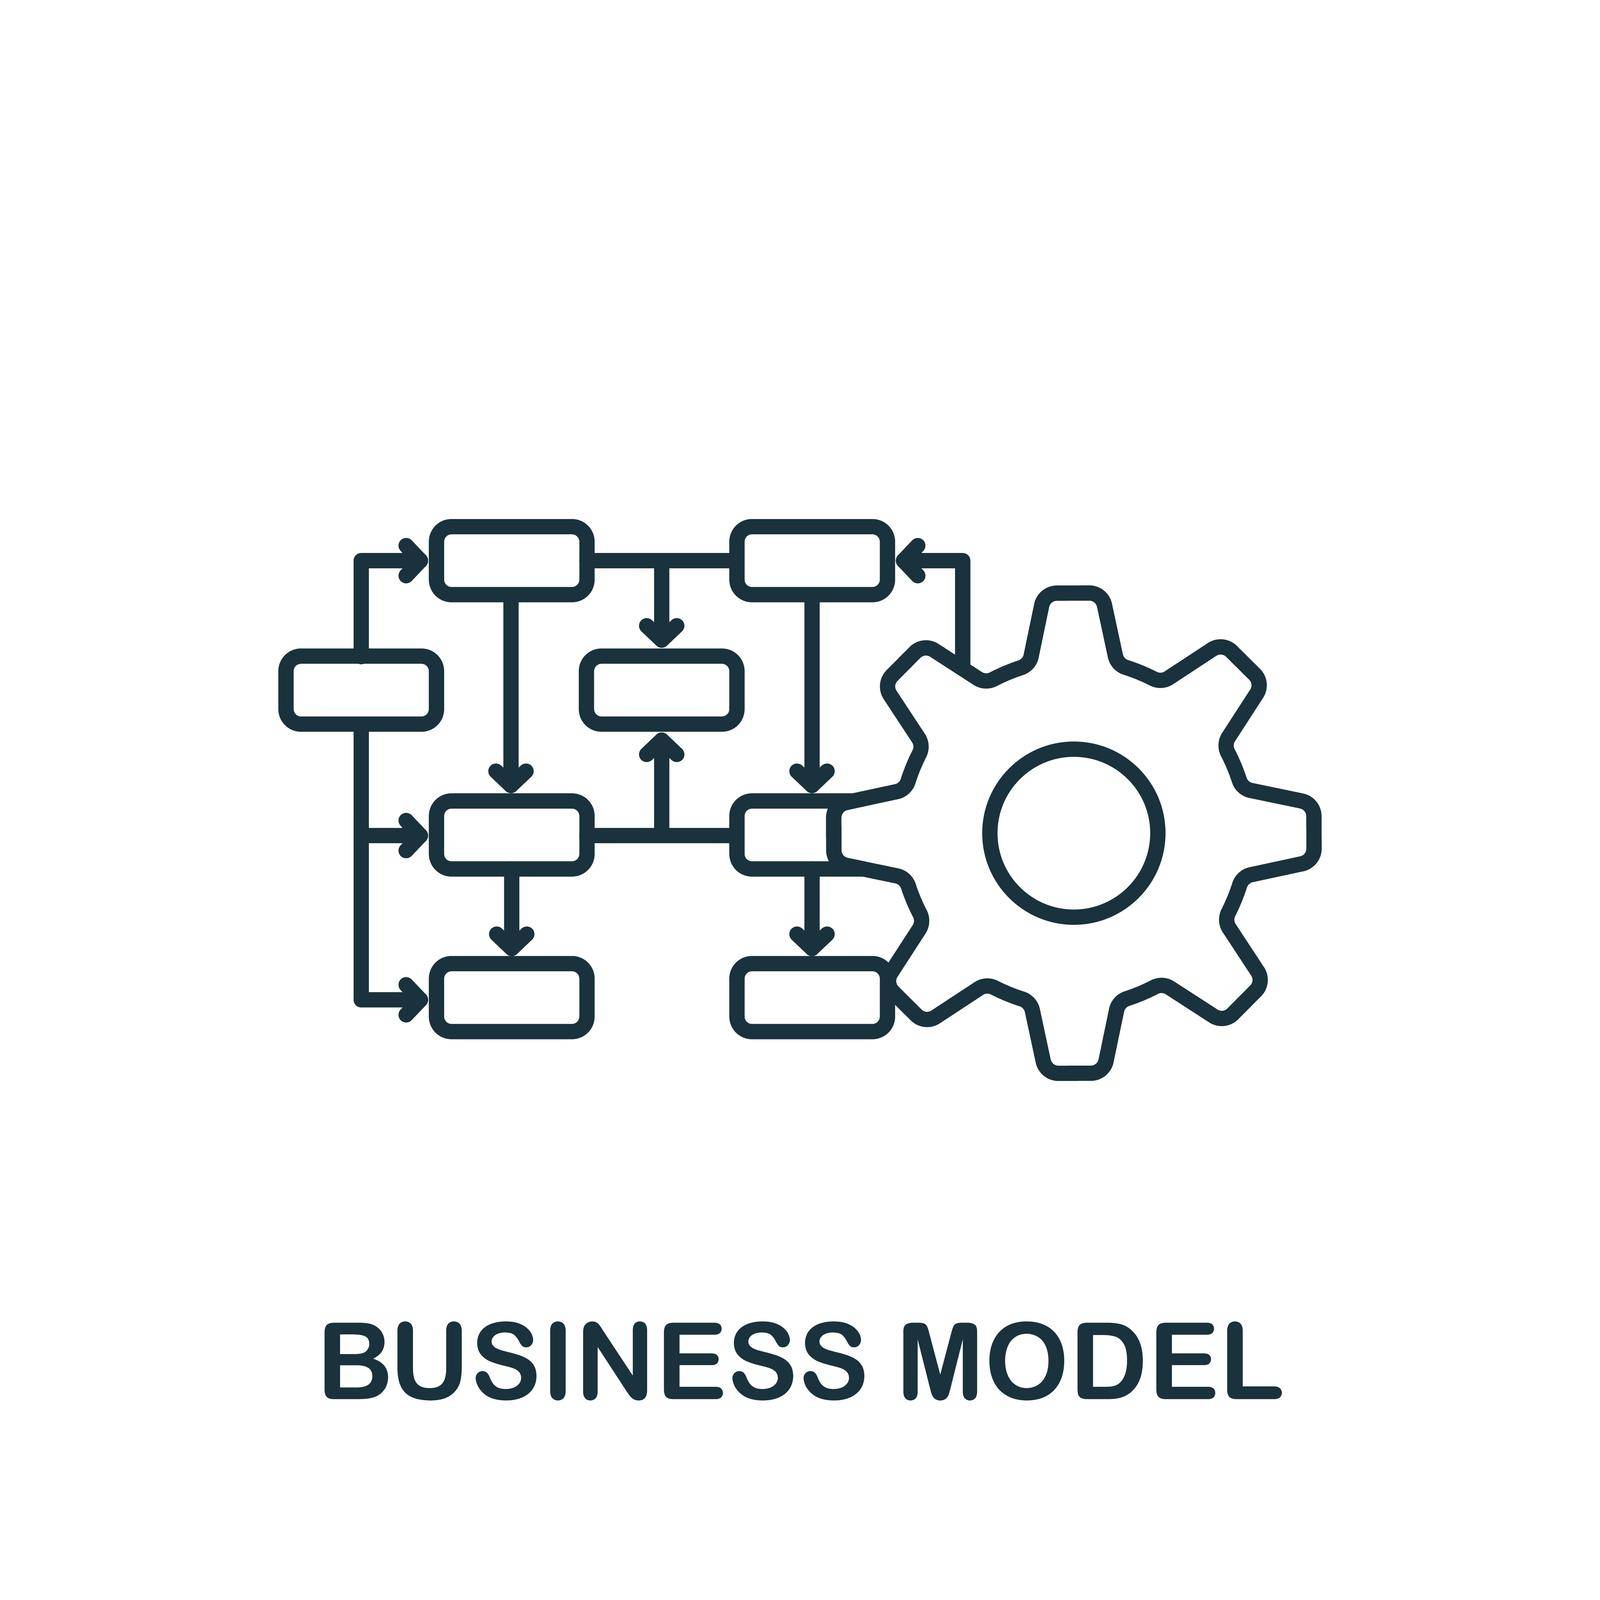 Business Model icon. Simple line element industry 4.0 symbol for templates, web design and infographics.